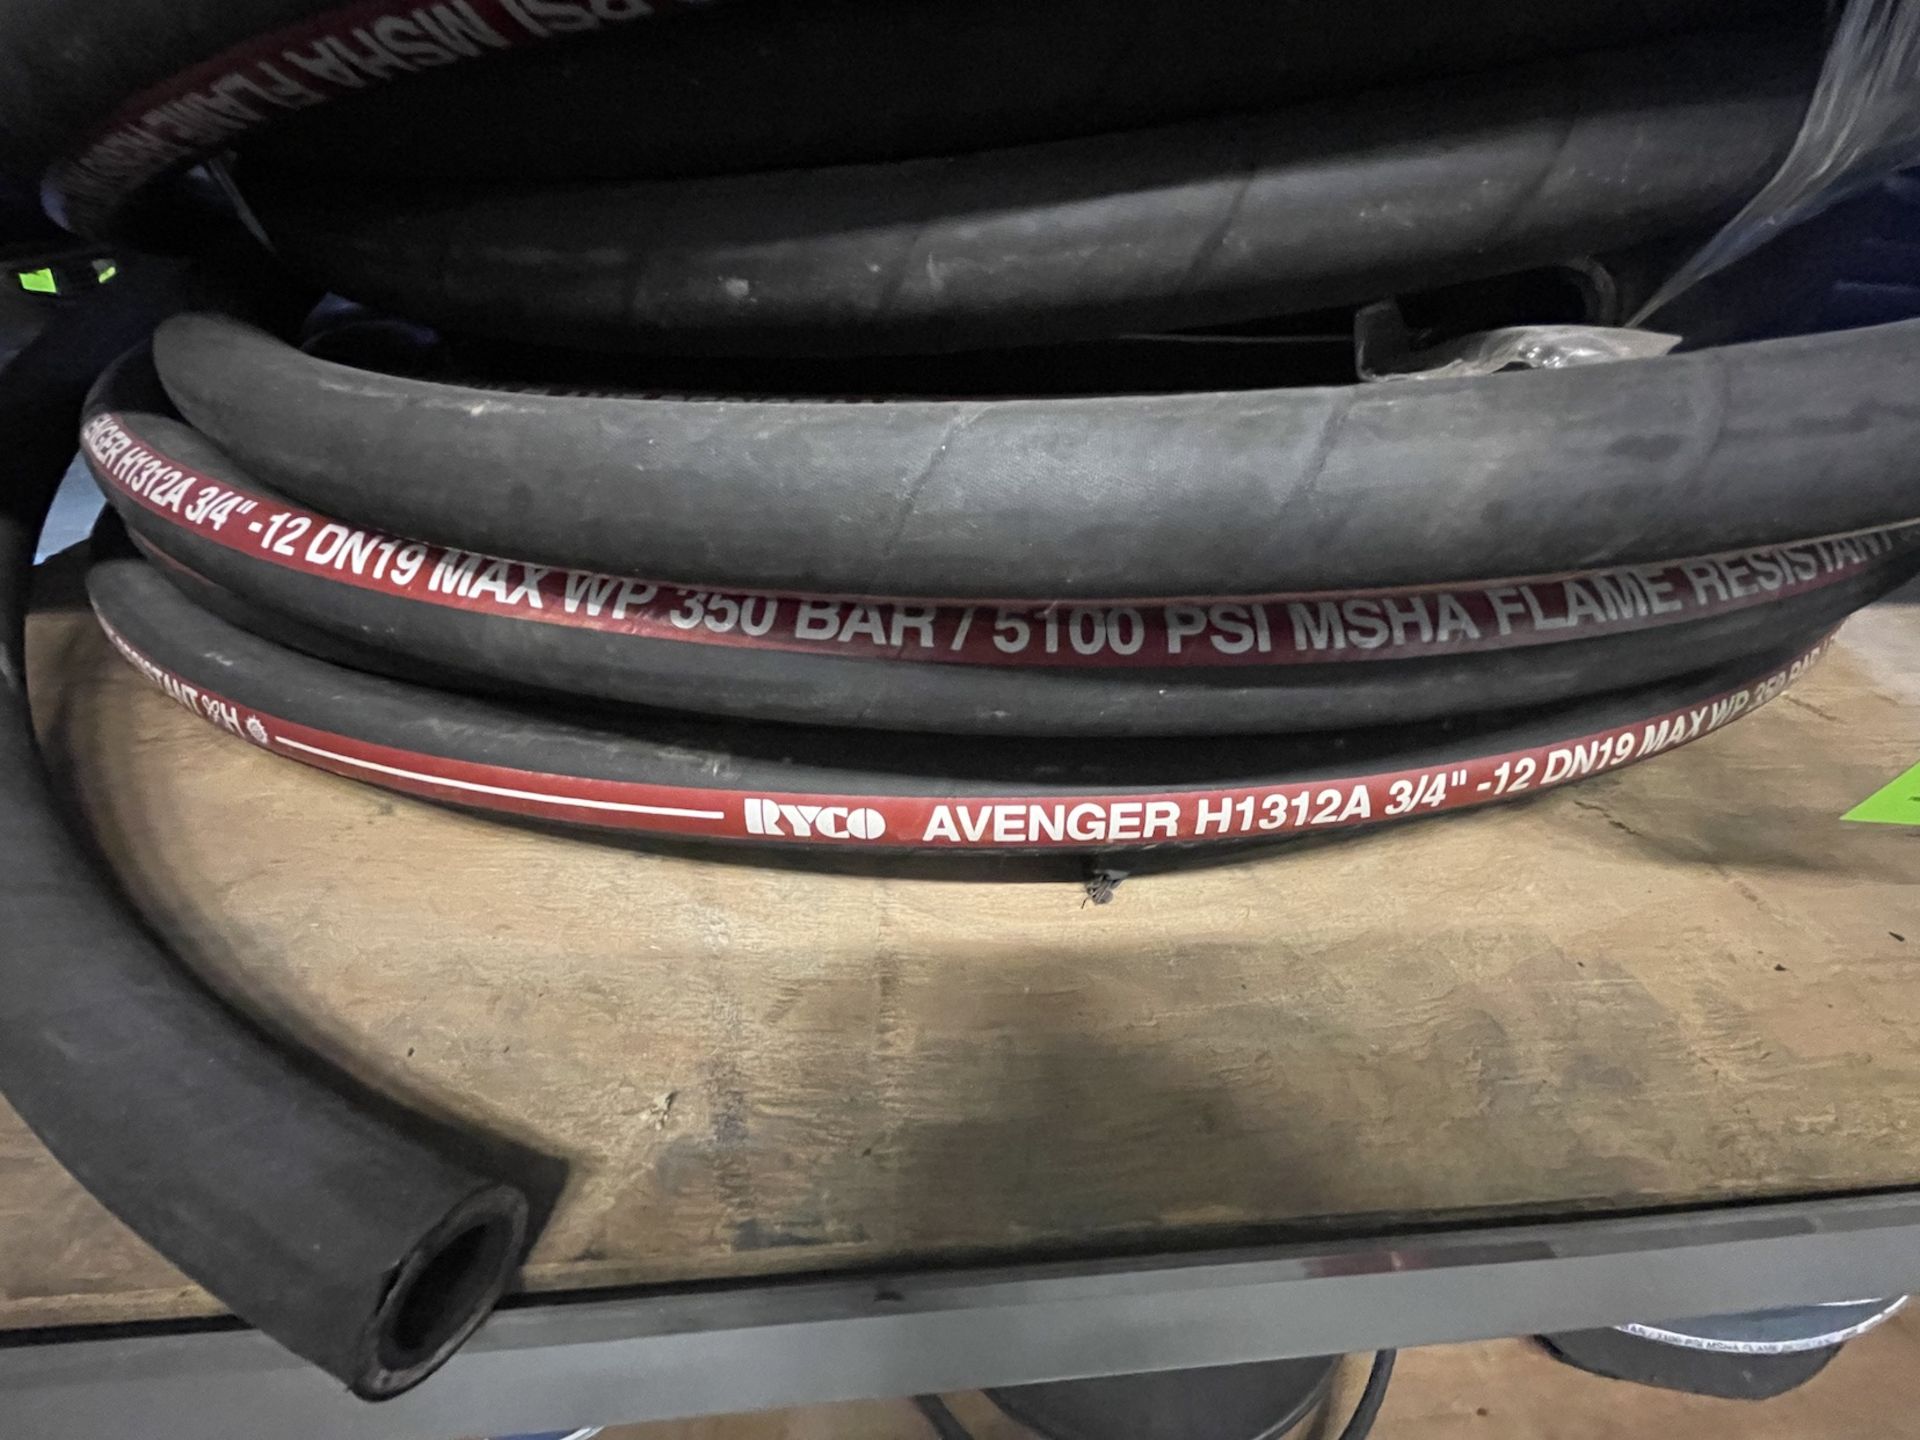 RYCO AVENGER H312A HYDRAULIC HOSE 3/4" 5100psi (ALL PURCHASES MUST BE PAID FOR AND REMOVED BY 5/4/ - Image 3 of 3